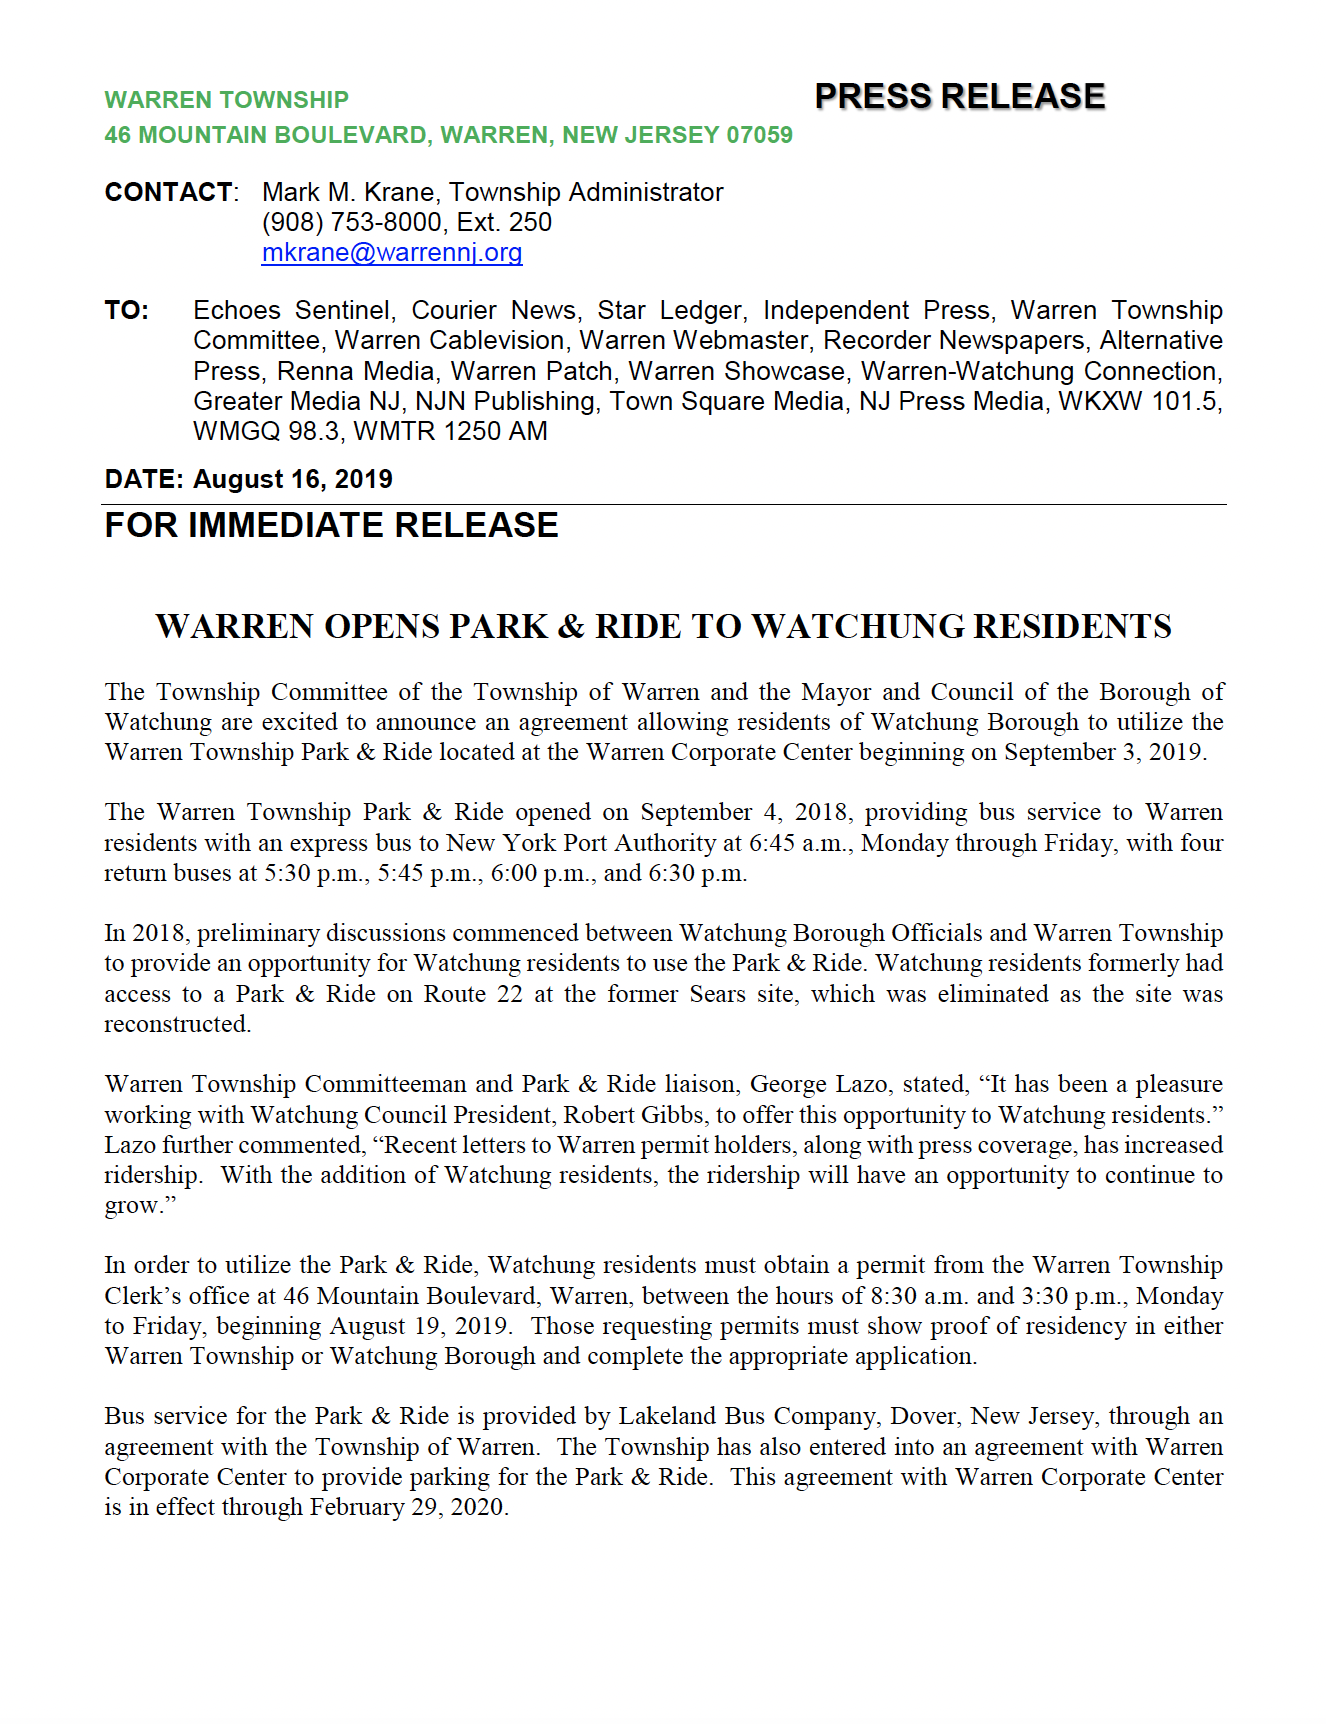 Warren opening Park Ride to Watchung Residents